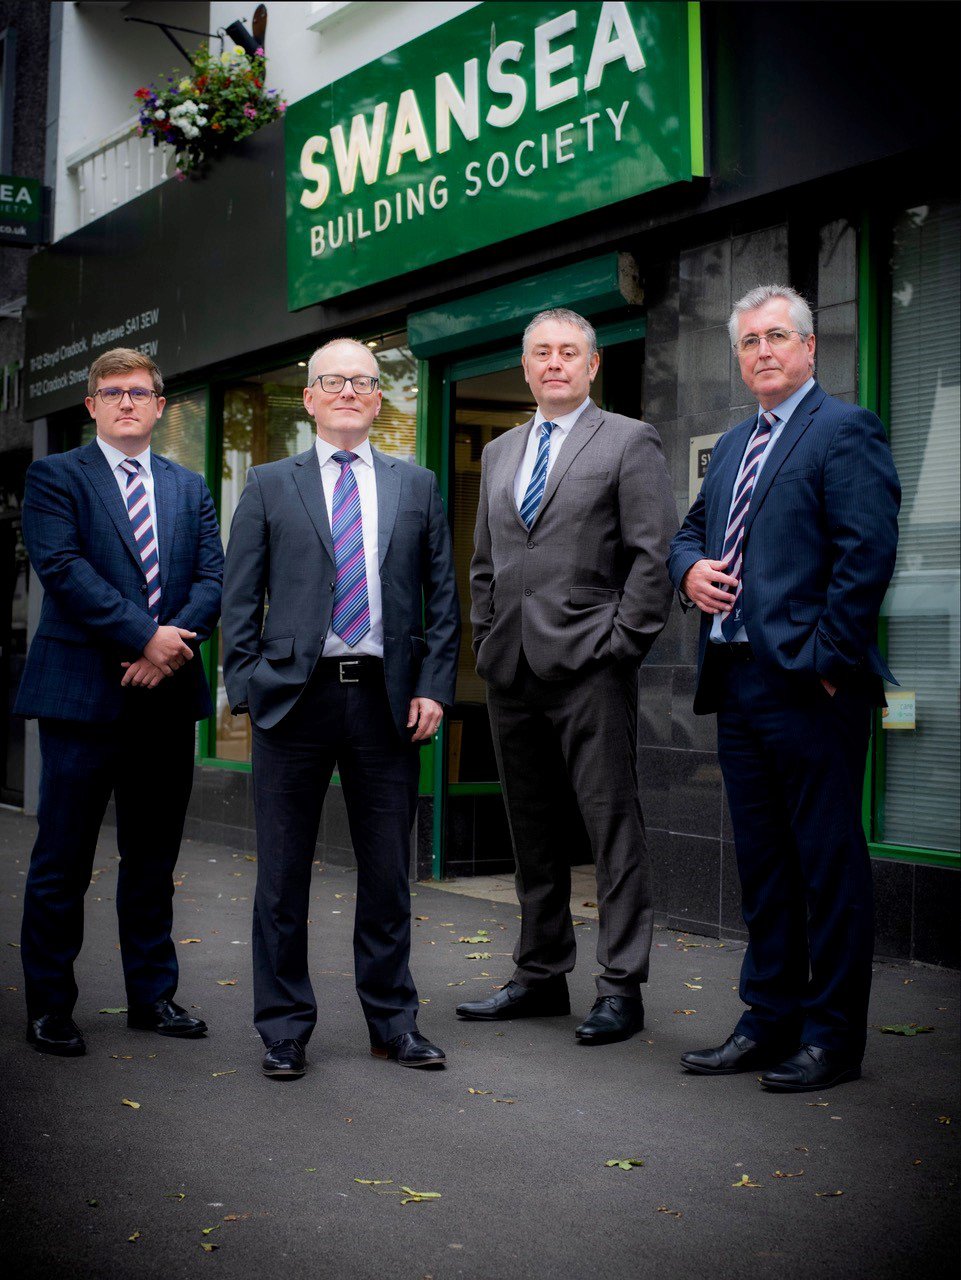 Swansea Building Society to host networking event for financial and legal professionals